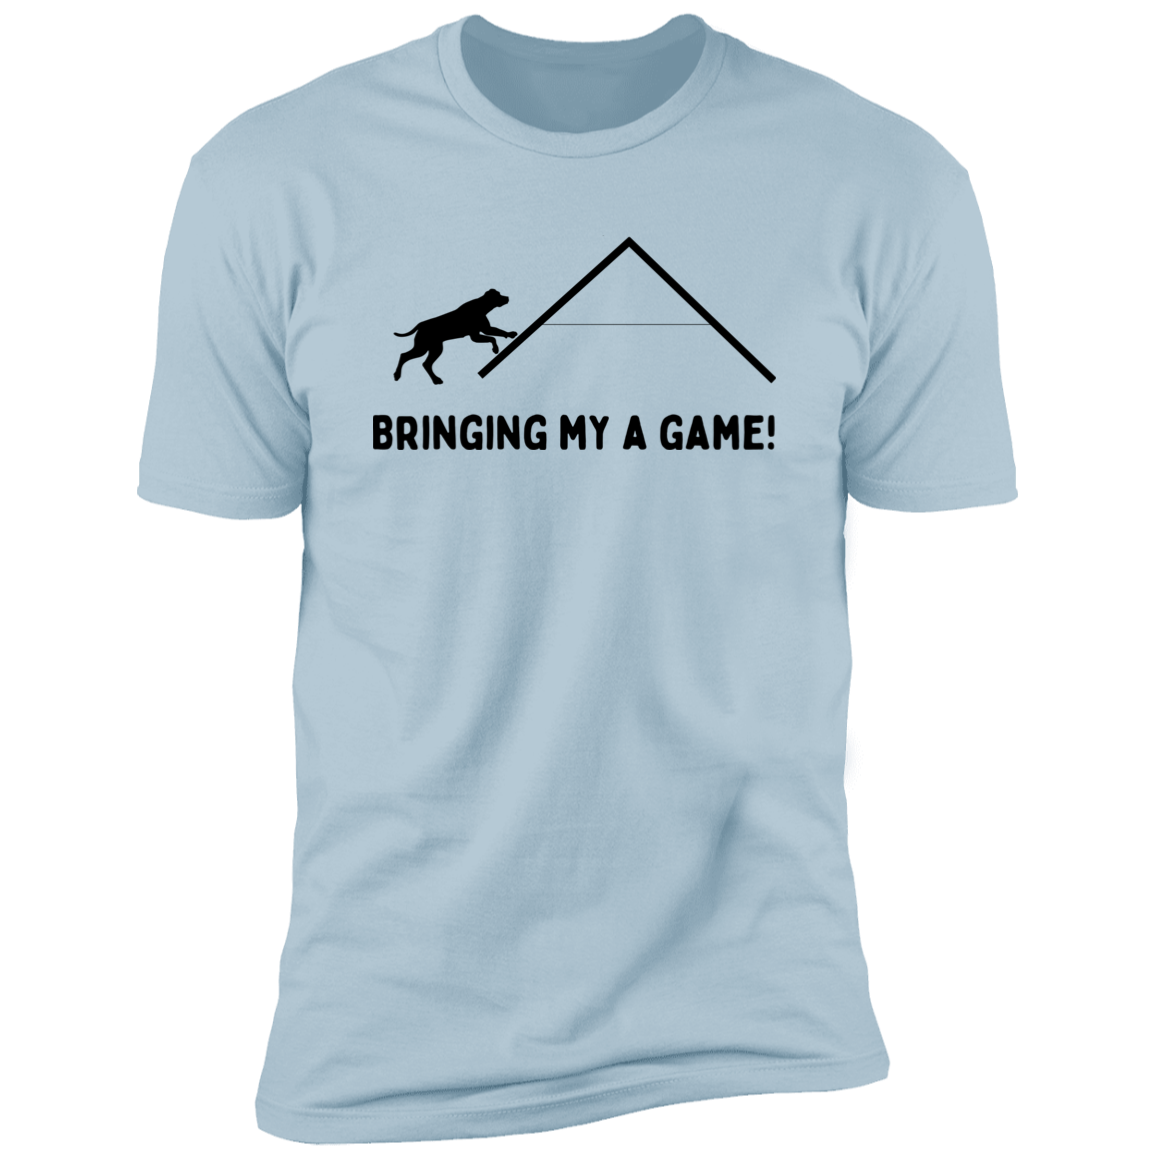 Bringing My A Game Agility T-shirt, Dog Agility Shirt for humans, in light blue